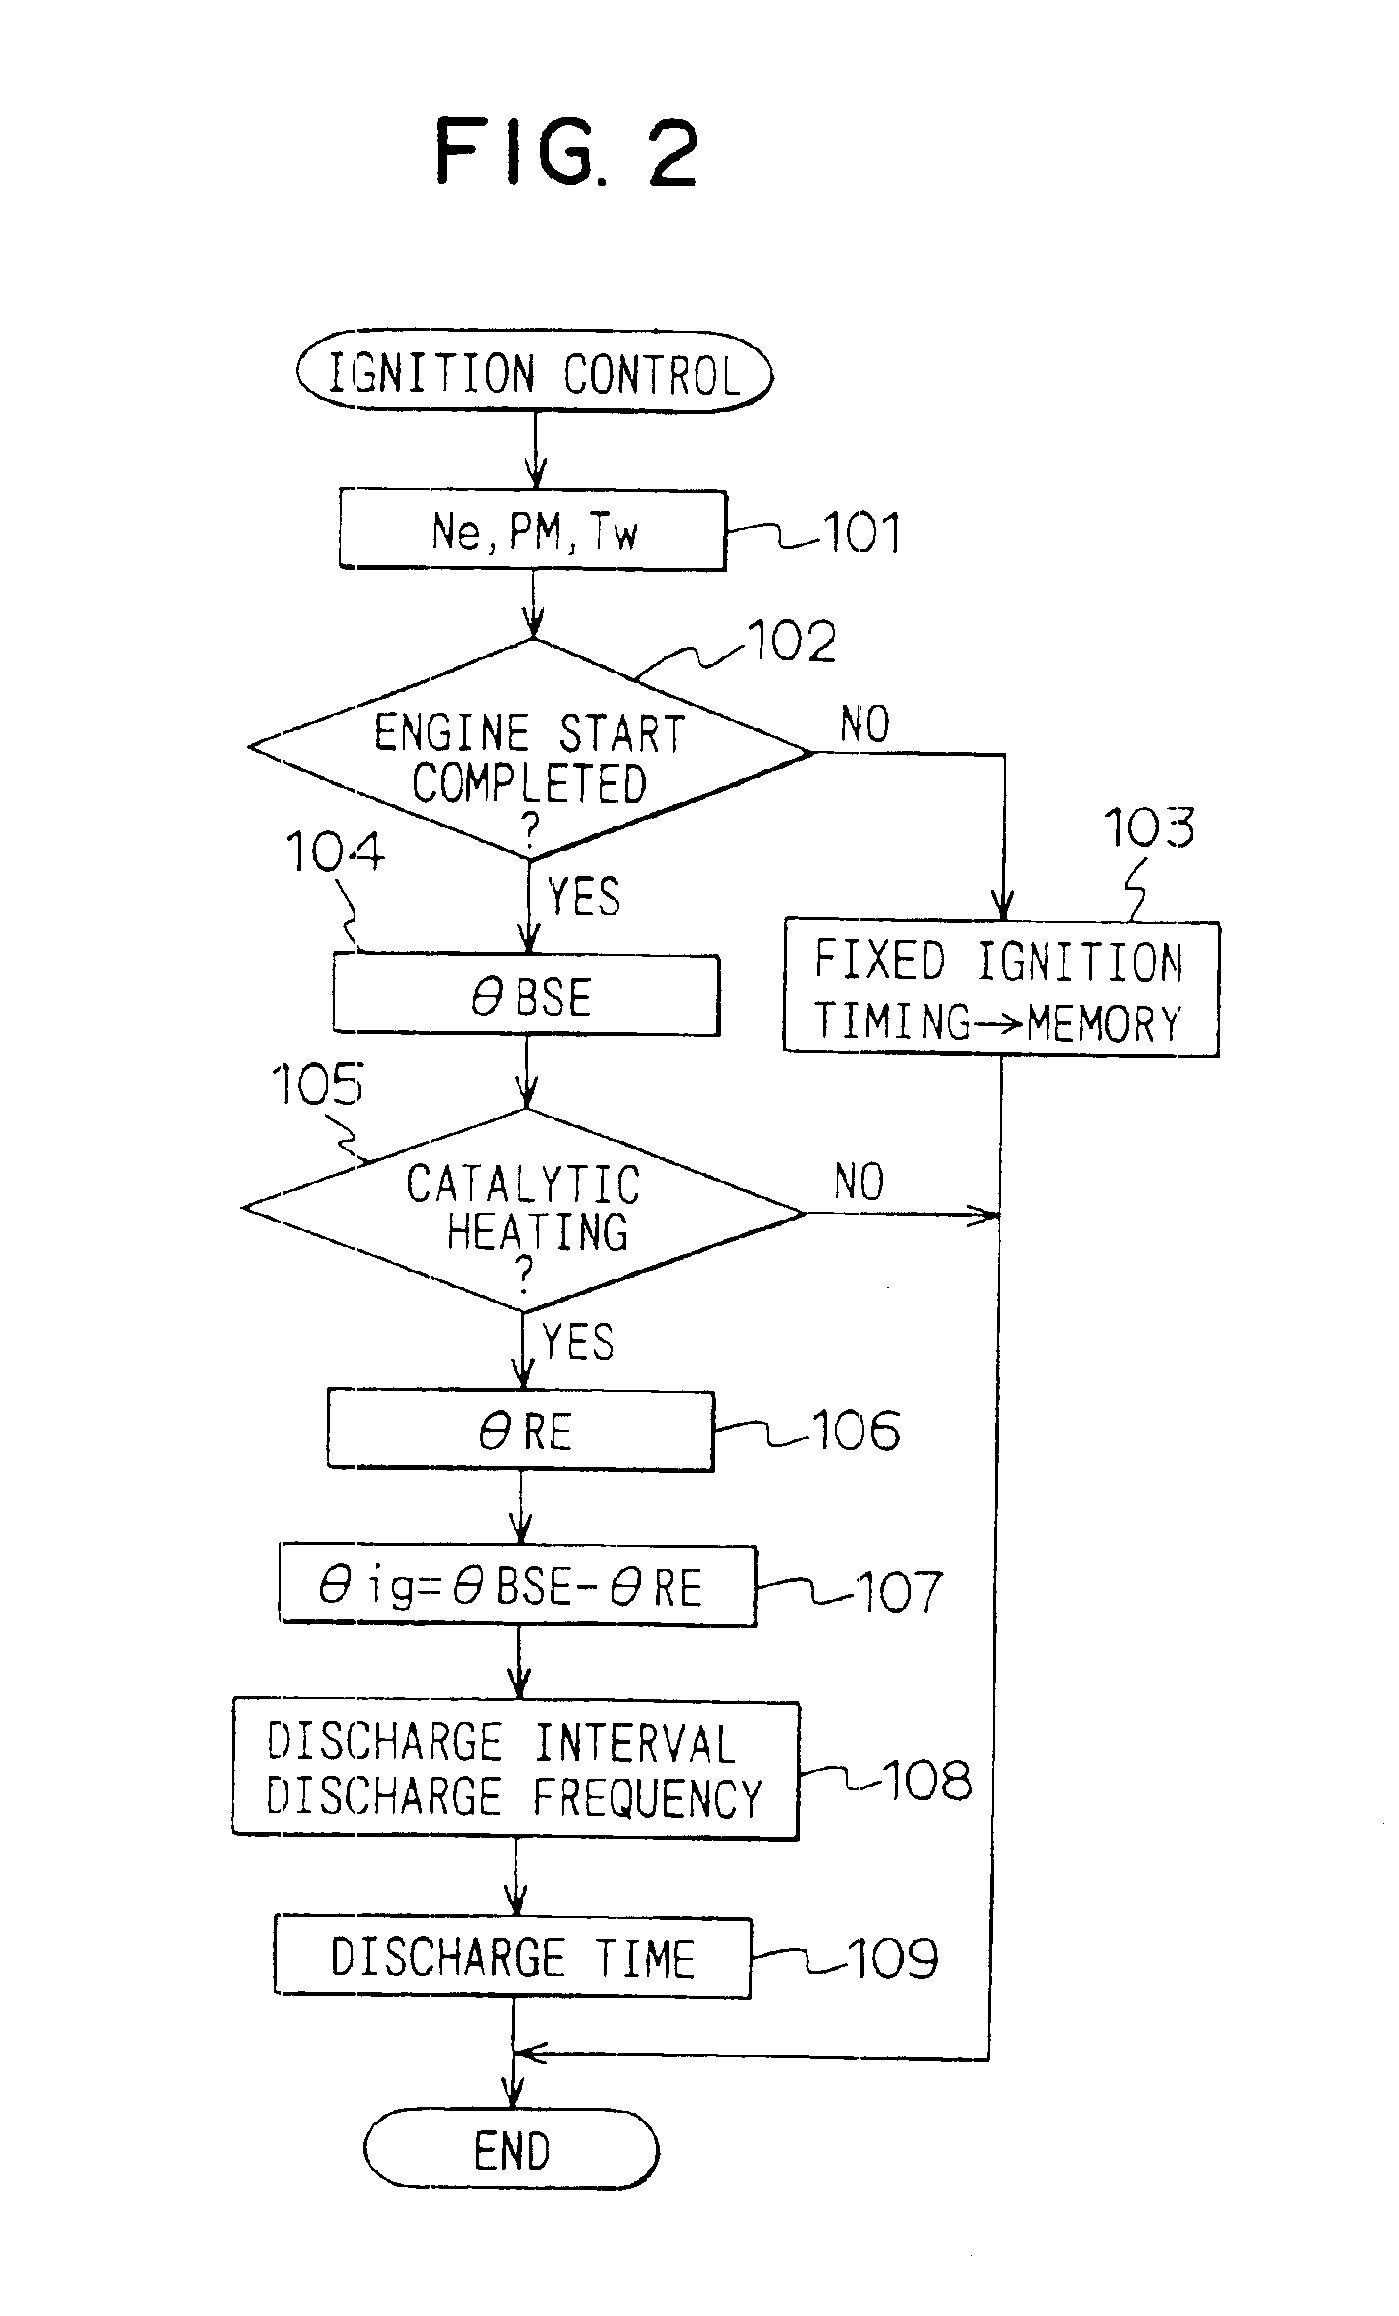 Ignition and injection control system for internal combustion engine